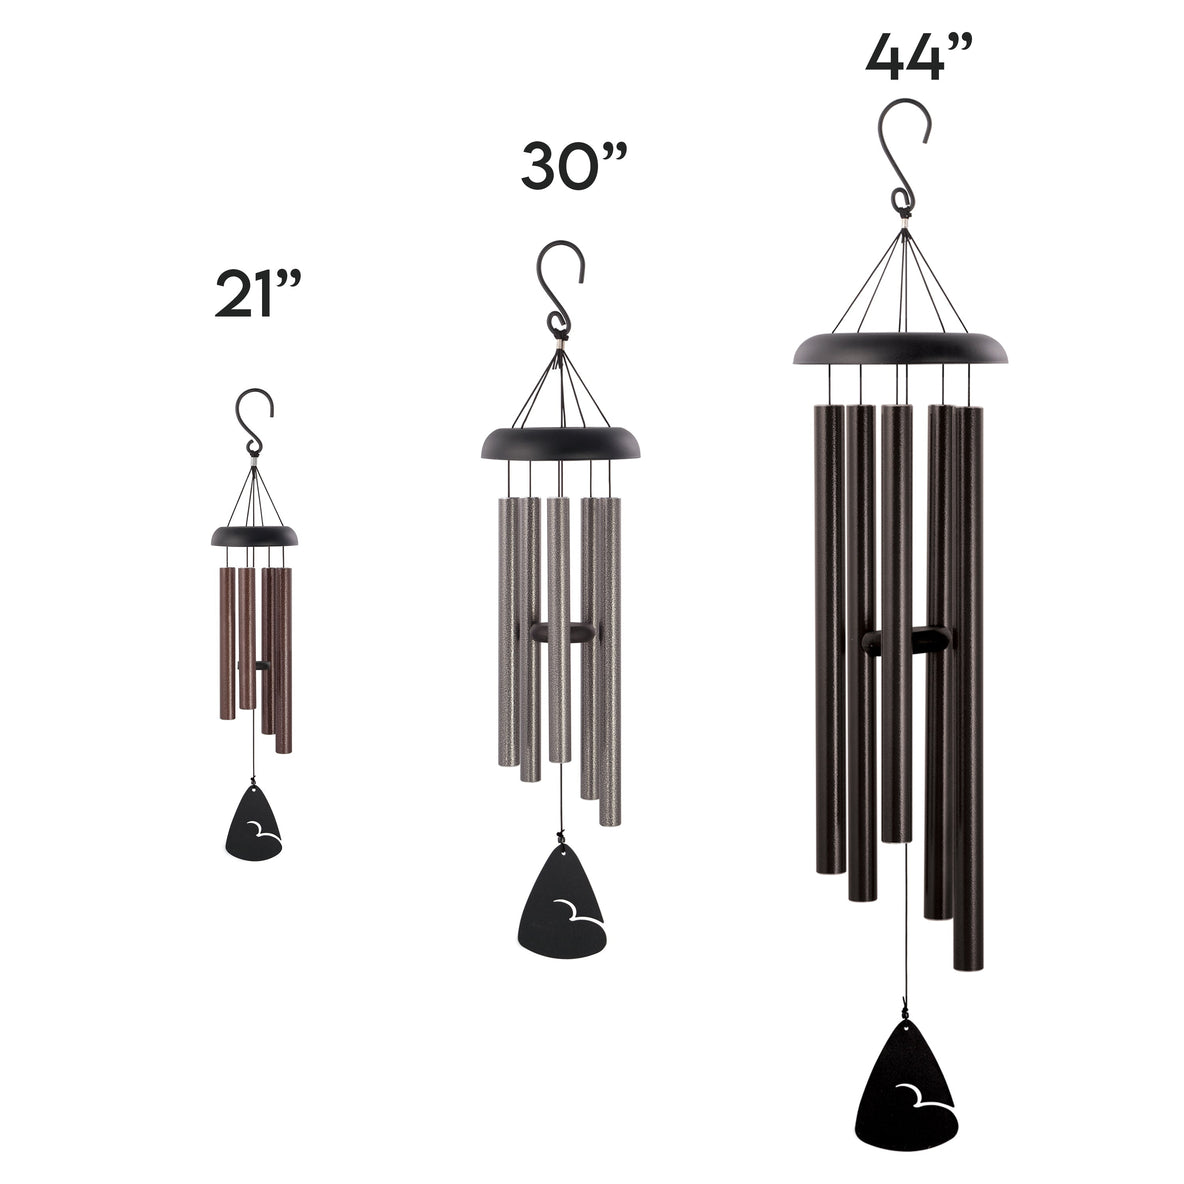 Personalized Memorial Wind Chime different sizes